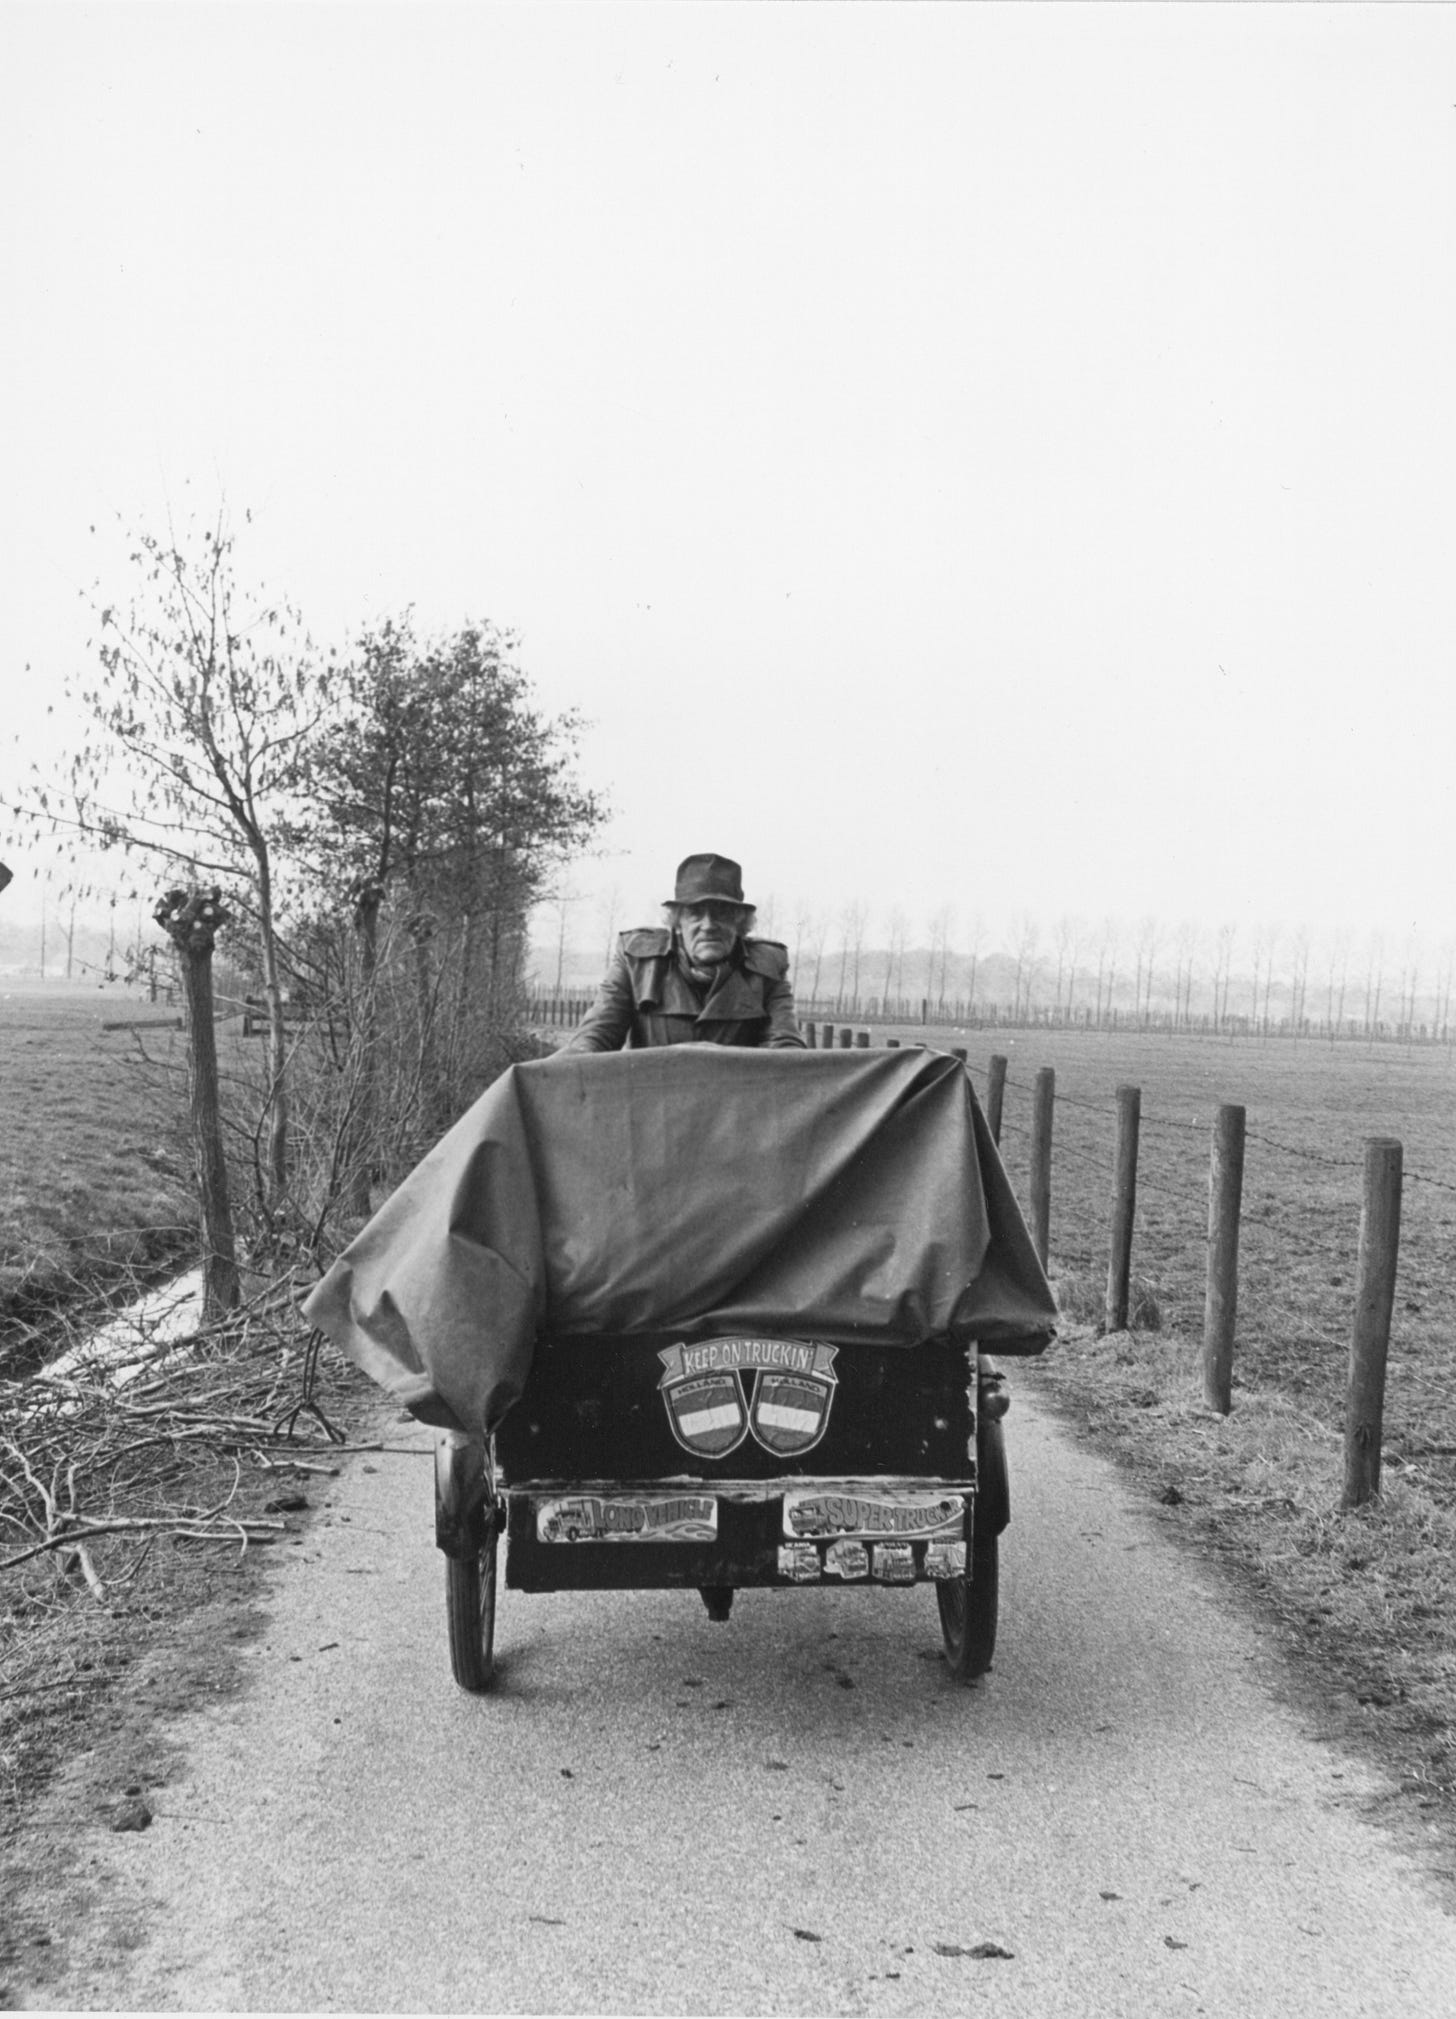 A man cycles a cargobike along a narrow country road